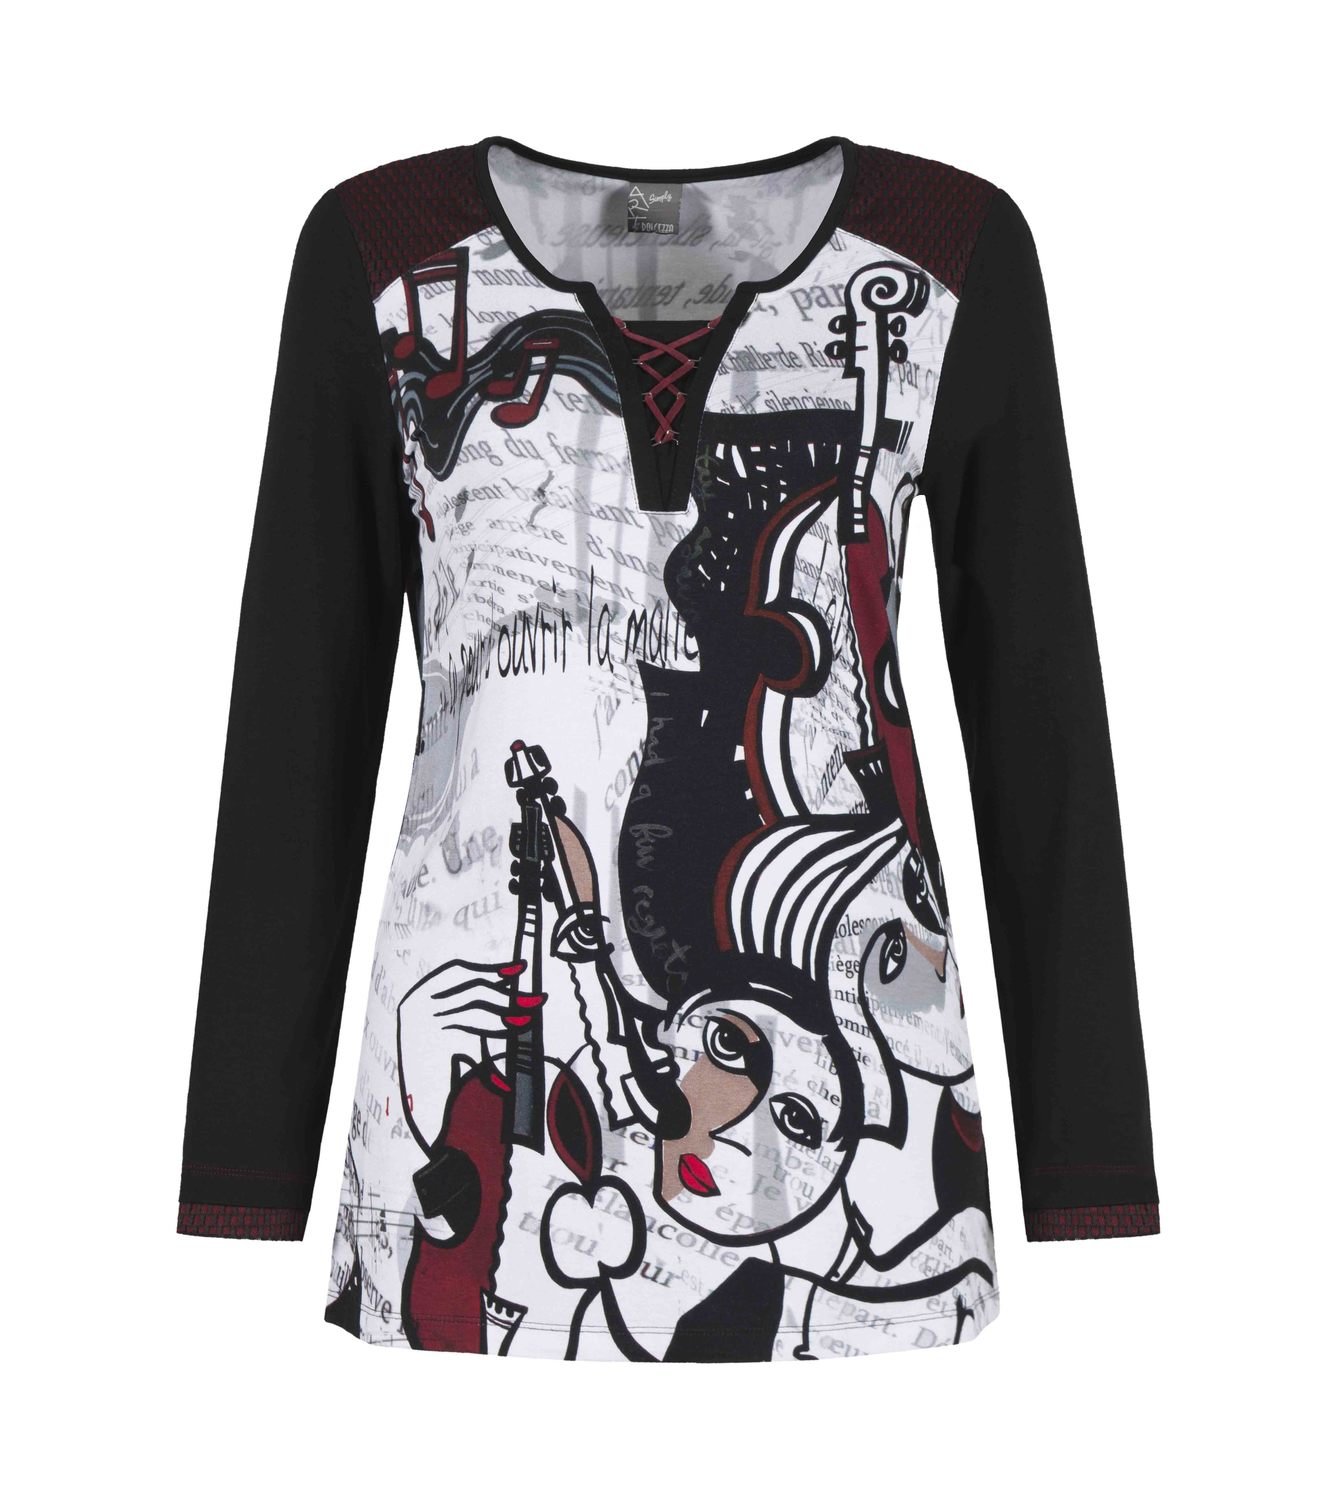 Simply Art Dolcezza: Charotte A Paris Violin Abstract Art Tunic SOLD OUT